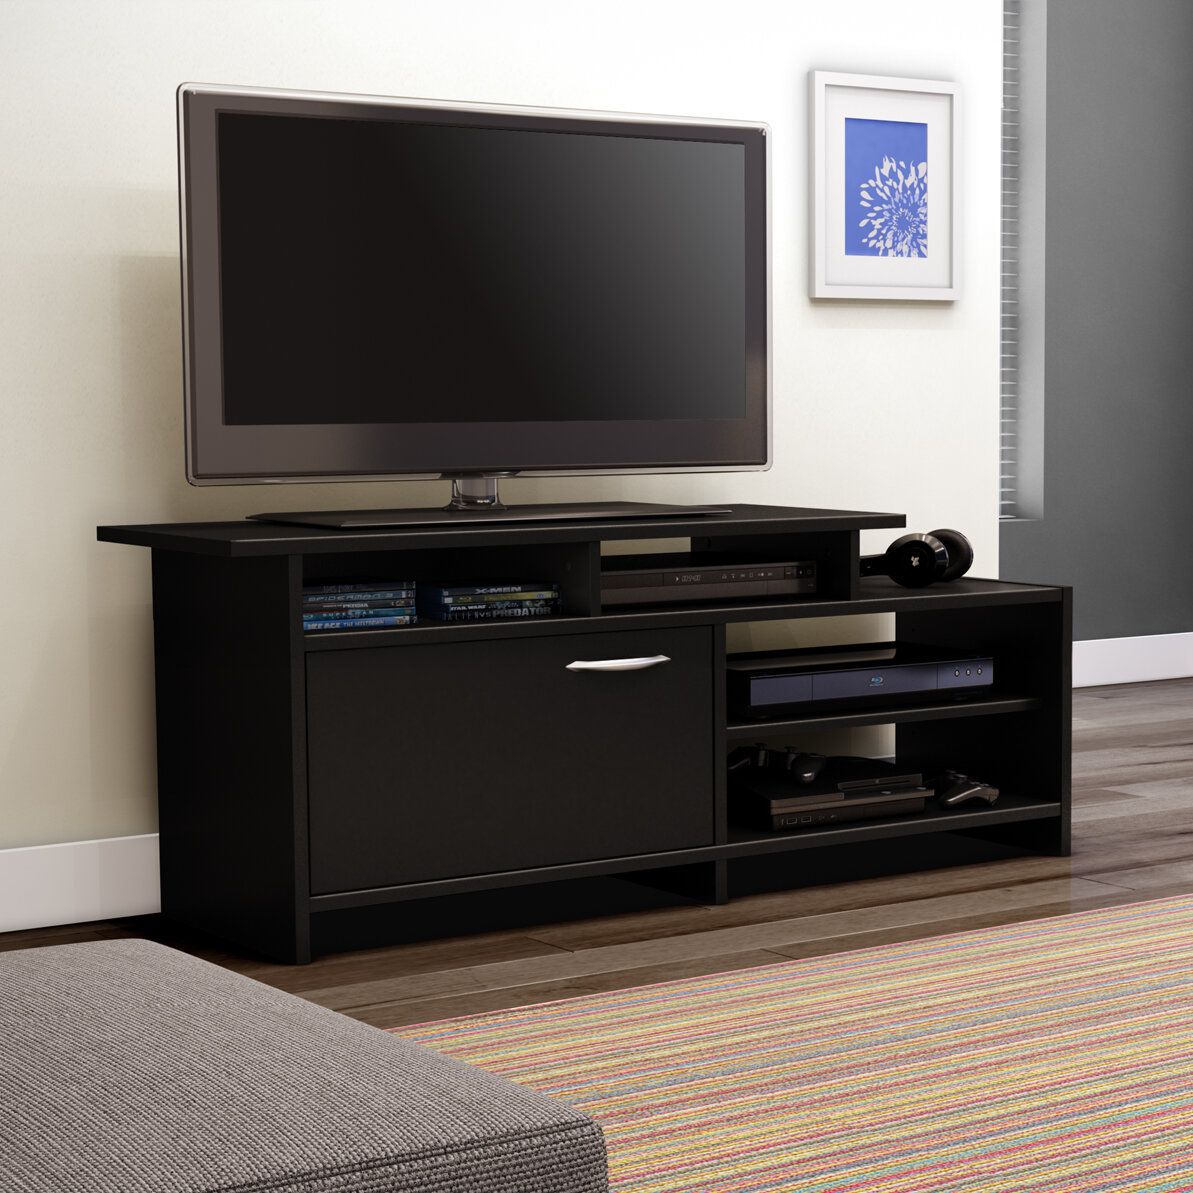 Black Tv Stand 60 Inch Flat Screen Entertainment Center Pertaining To Contemporary Tv Stands For Flat Screens (View 13 of 15)